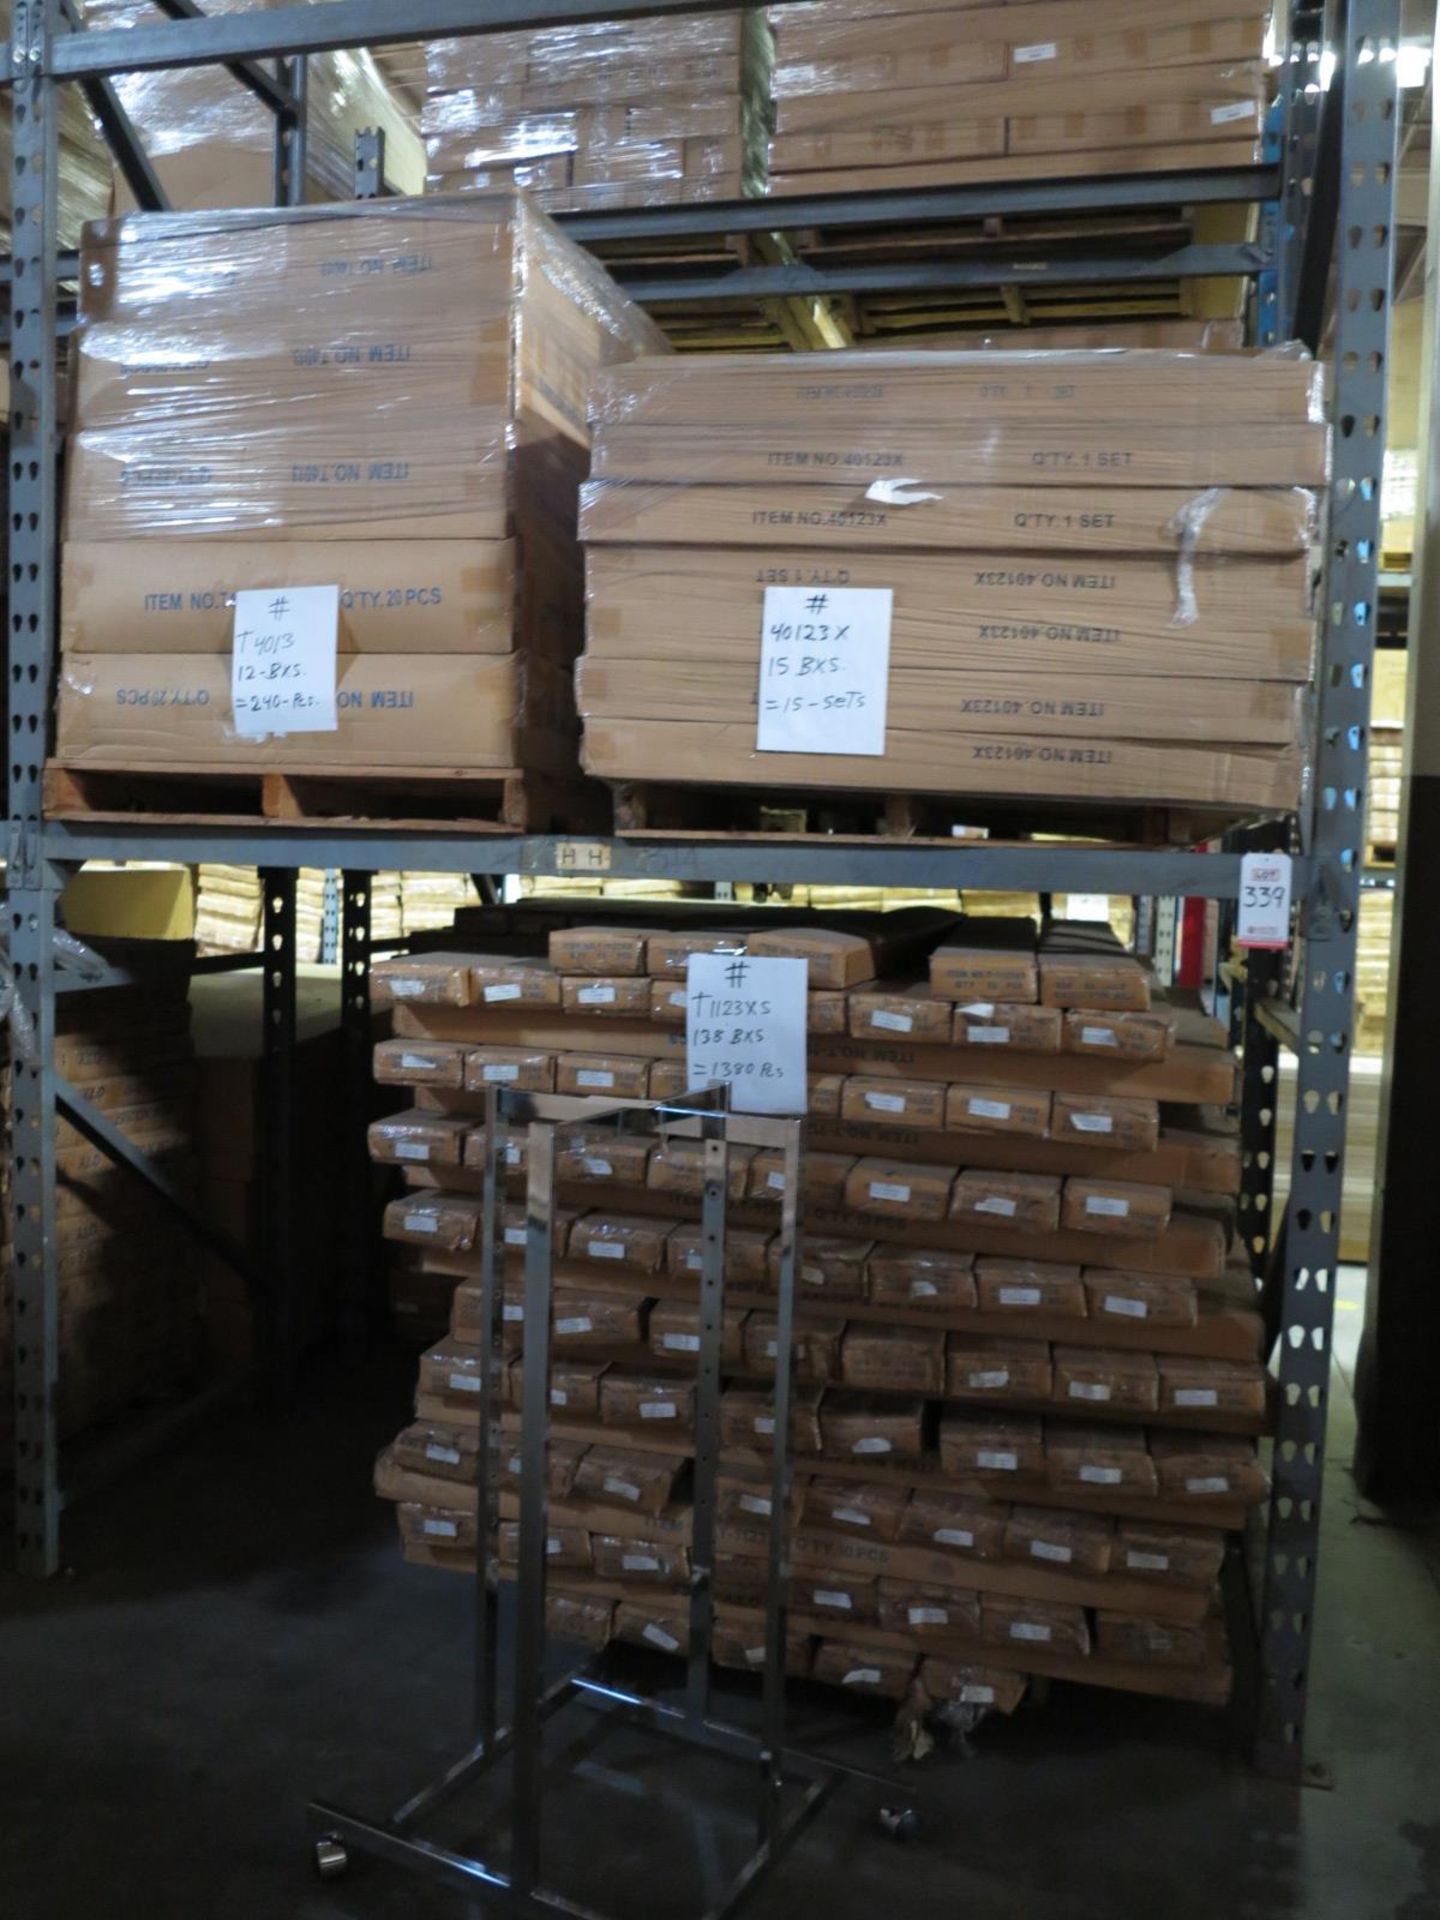 LOT - CONTENTS OF (2) SECTIONS OF PALLET RACK TO INCLUDE: ITEM # 40123, 4 WAY RACK W (4) 18" STR.